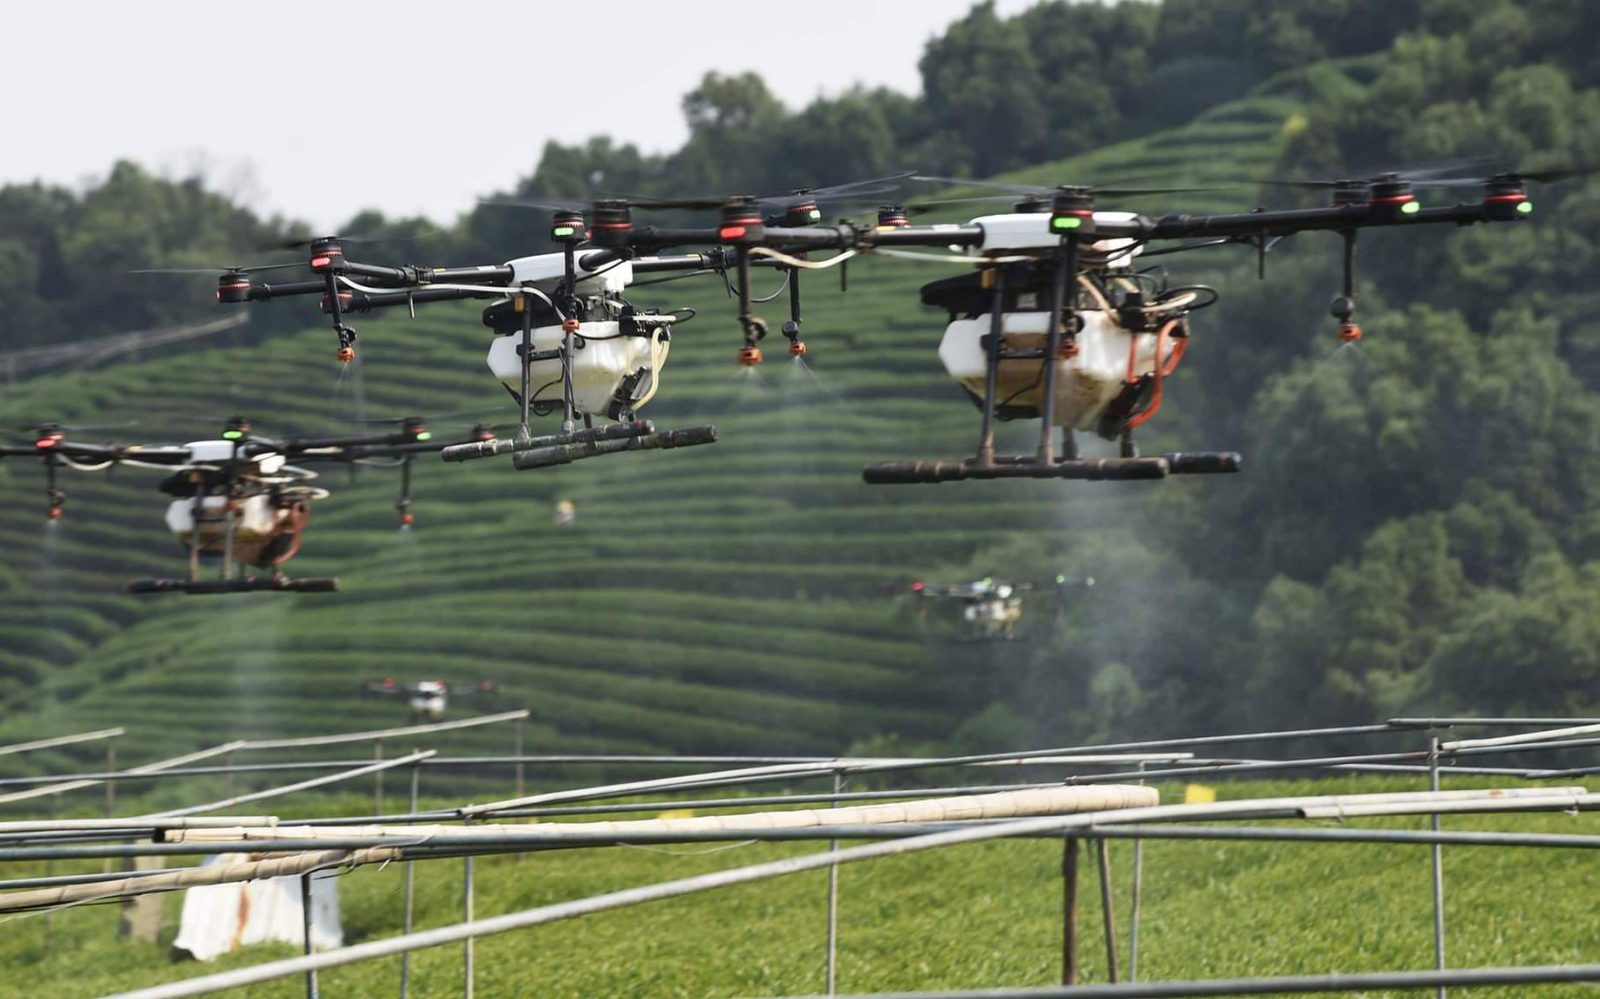 Drones may boost UK economy by £42bn ($56bn USD) by 2030 and add hundreds of thousands of jobs